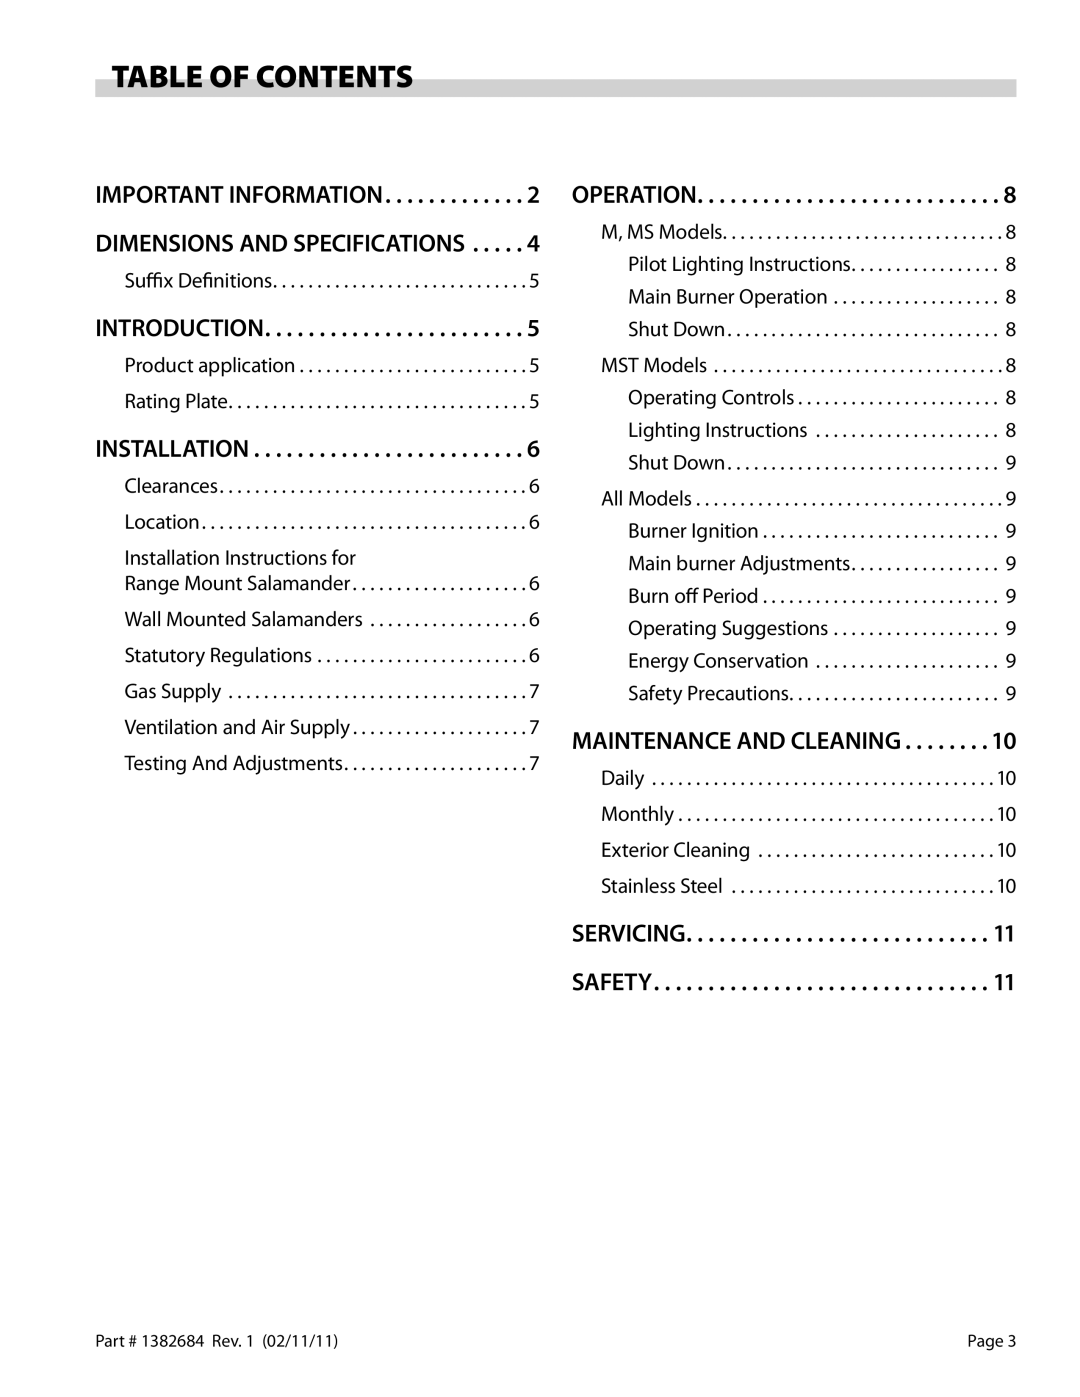 Garland SRC, SR16 operation manual Table Of Contents, Introduction, Installation, Operation, Maintenance And Cleaning 